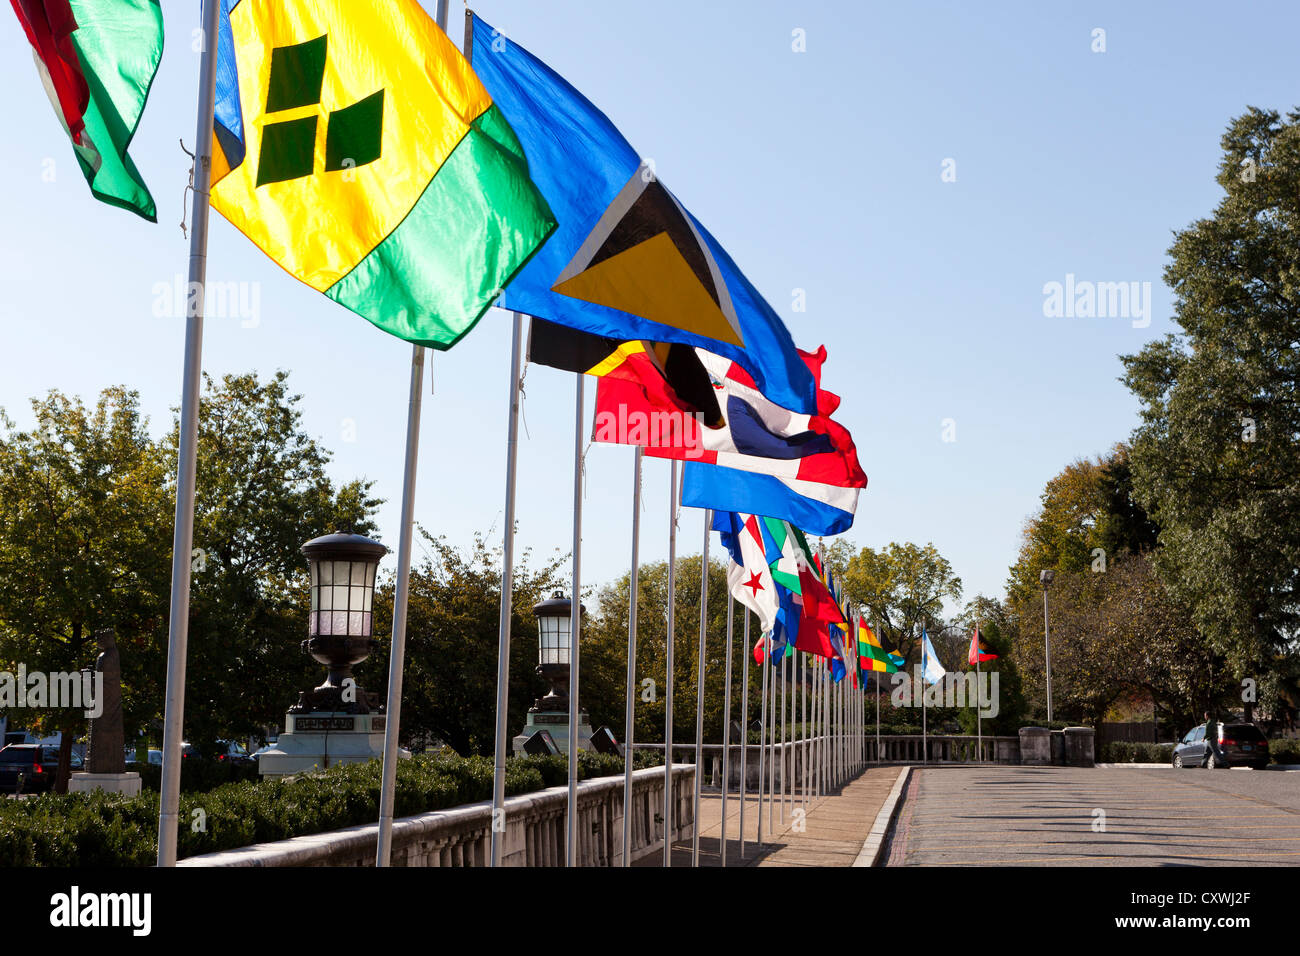 Multi national flags on poles Stock Photo